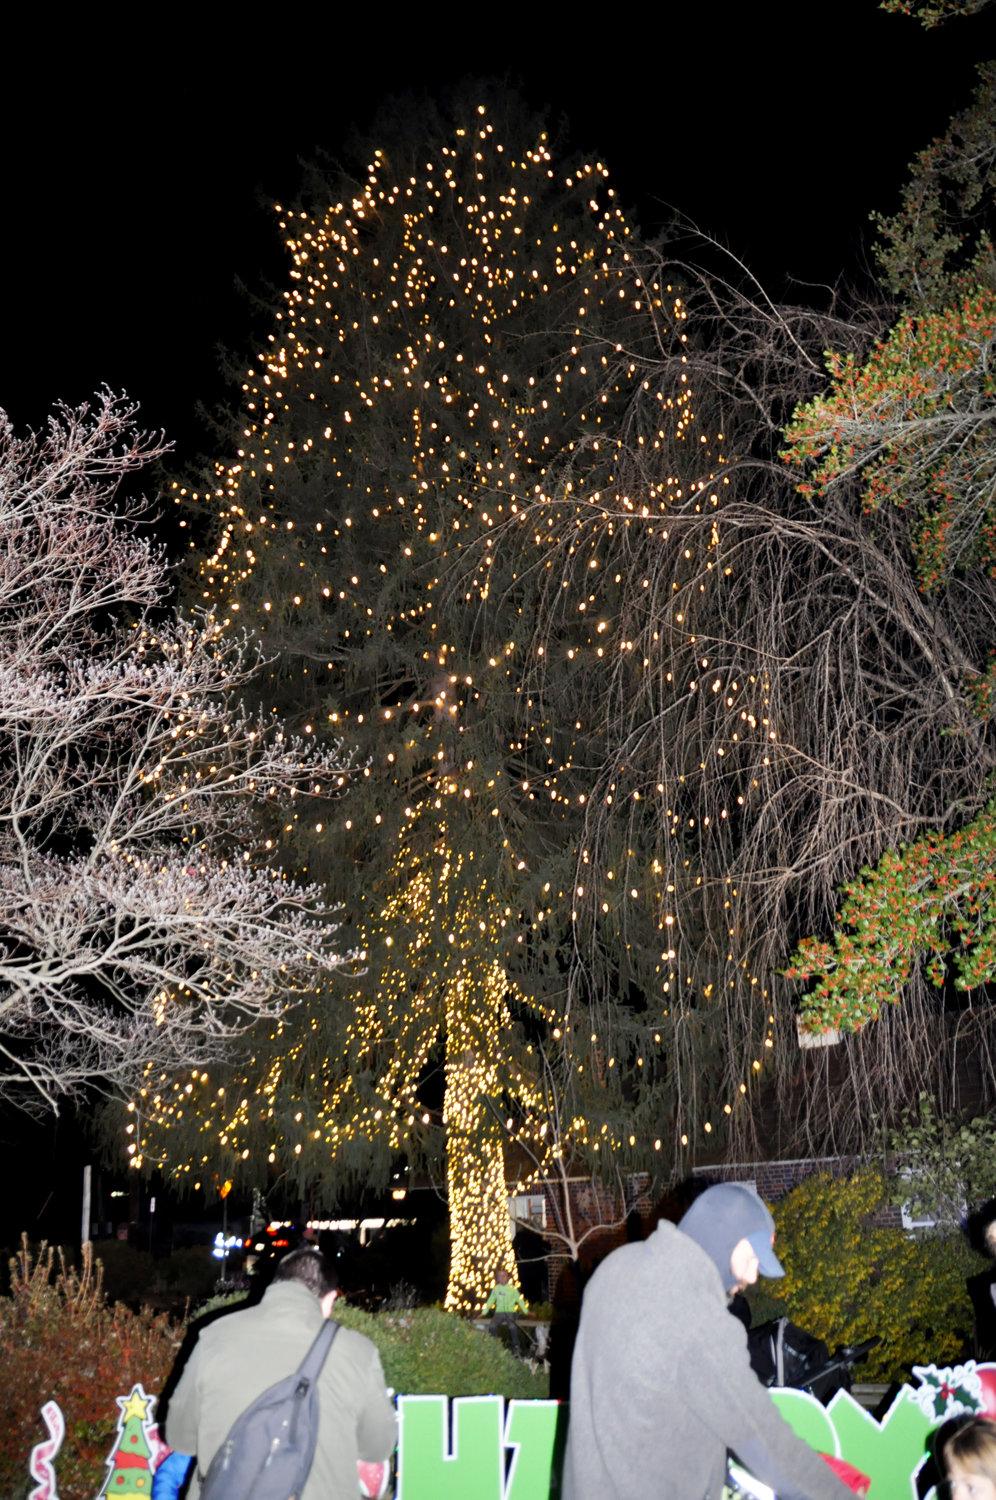 At more than 70 feet tall and 40 feet wide, the evergreen tree will be illuminated every night from 5:00pm-10:00pm throughout December.